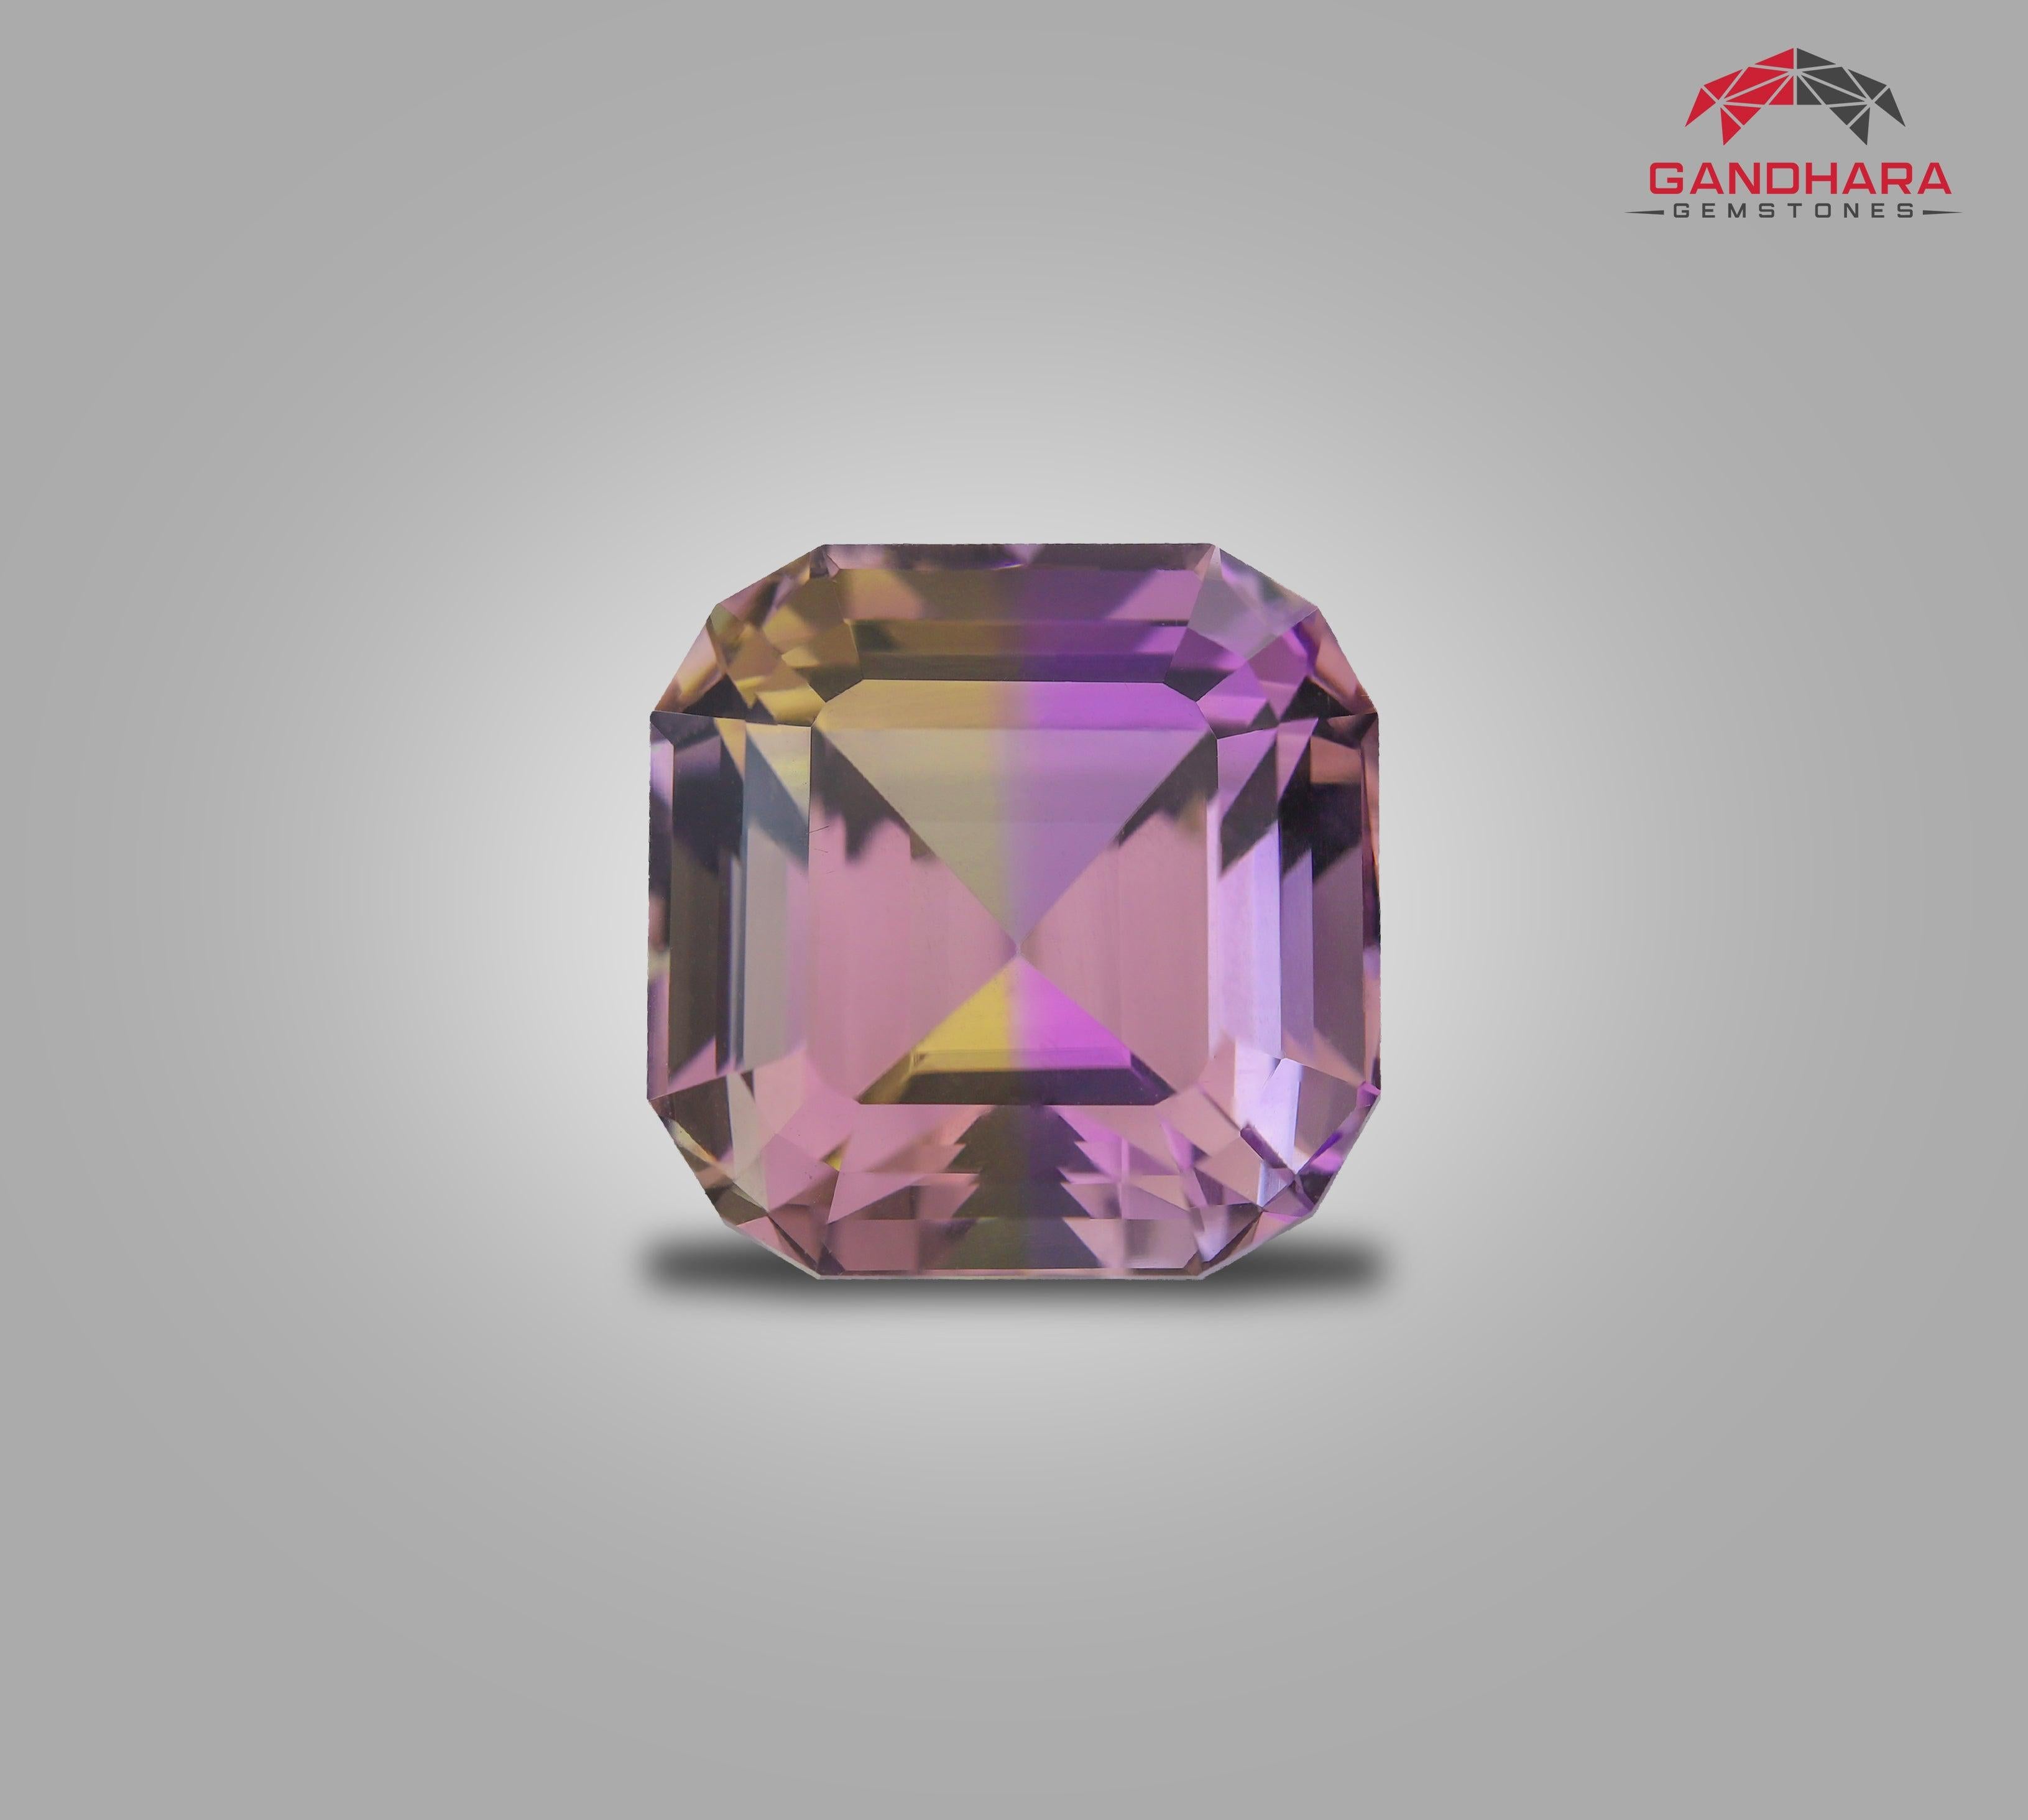 Perfect Loose Ametrine Gemstone, available for sale, natural high-quality loose gemstone, flawless loupe clean, Custom Precision Cut, 12.400 carats ametrine gemstone from Bolivia.

Product Information:
GEMSTONE TYPE	Perfect Loose Ametrine